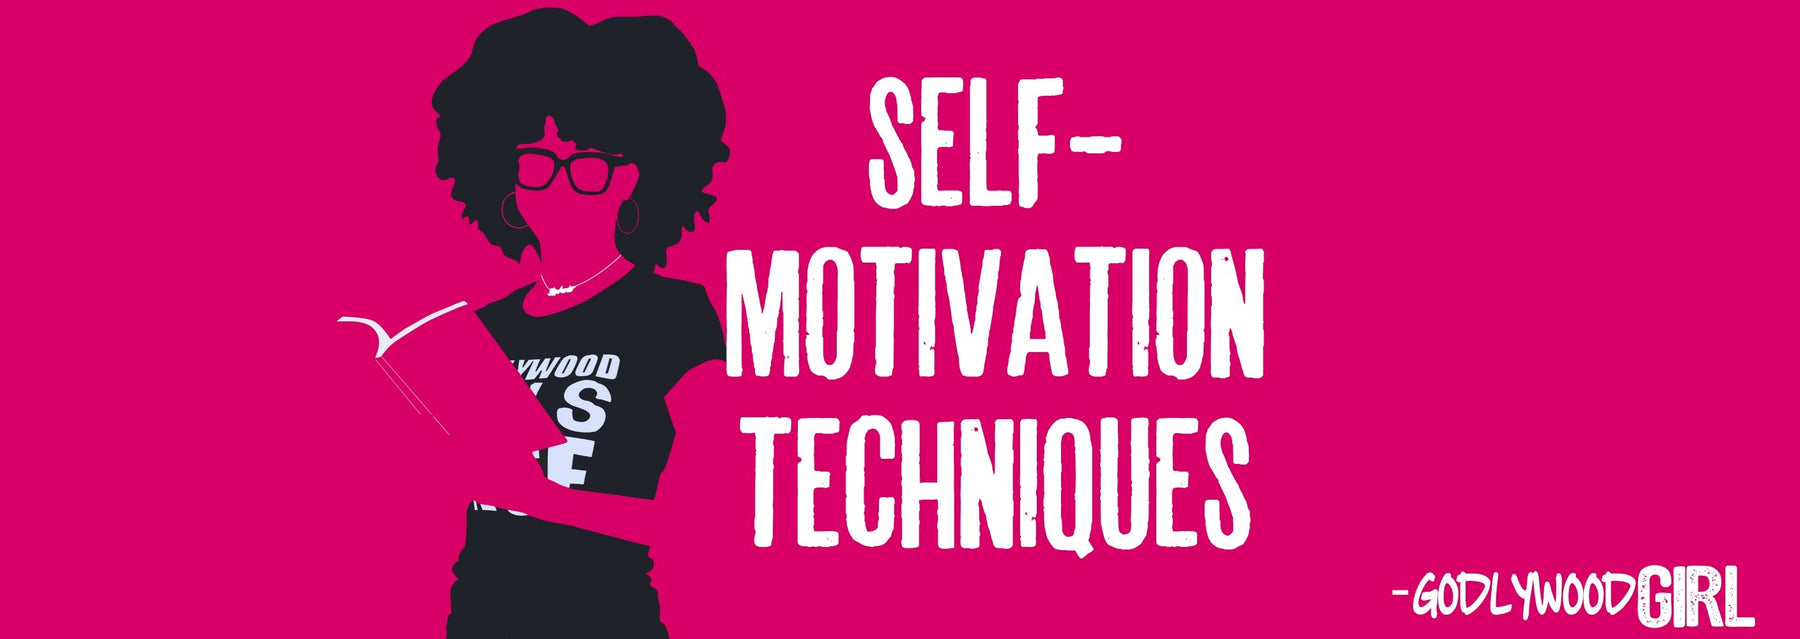 SELF MOTIVATION TECHNIQUES PDF (That Will MOTIVATE You To Do ANYTHING) || SELF-MOTIVATION SERIES #4